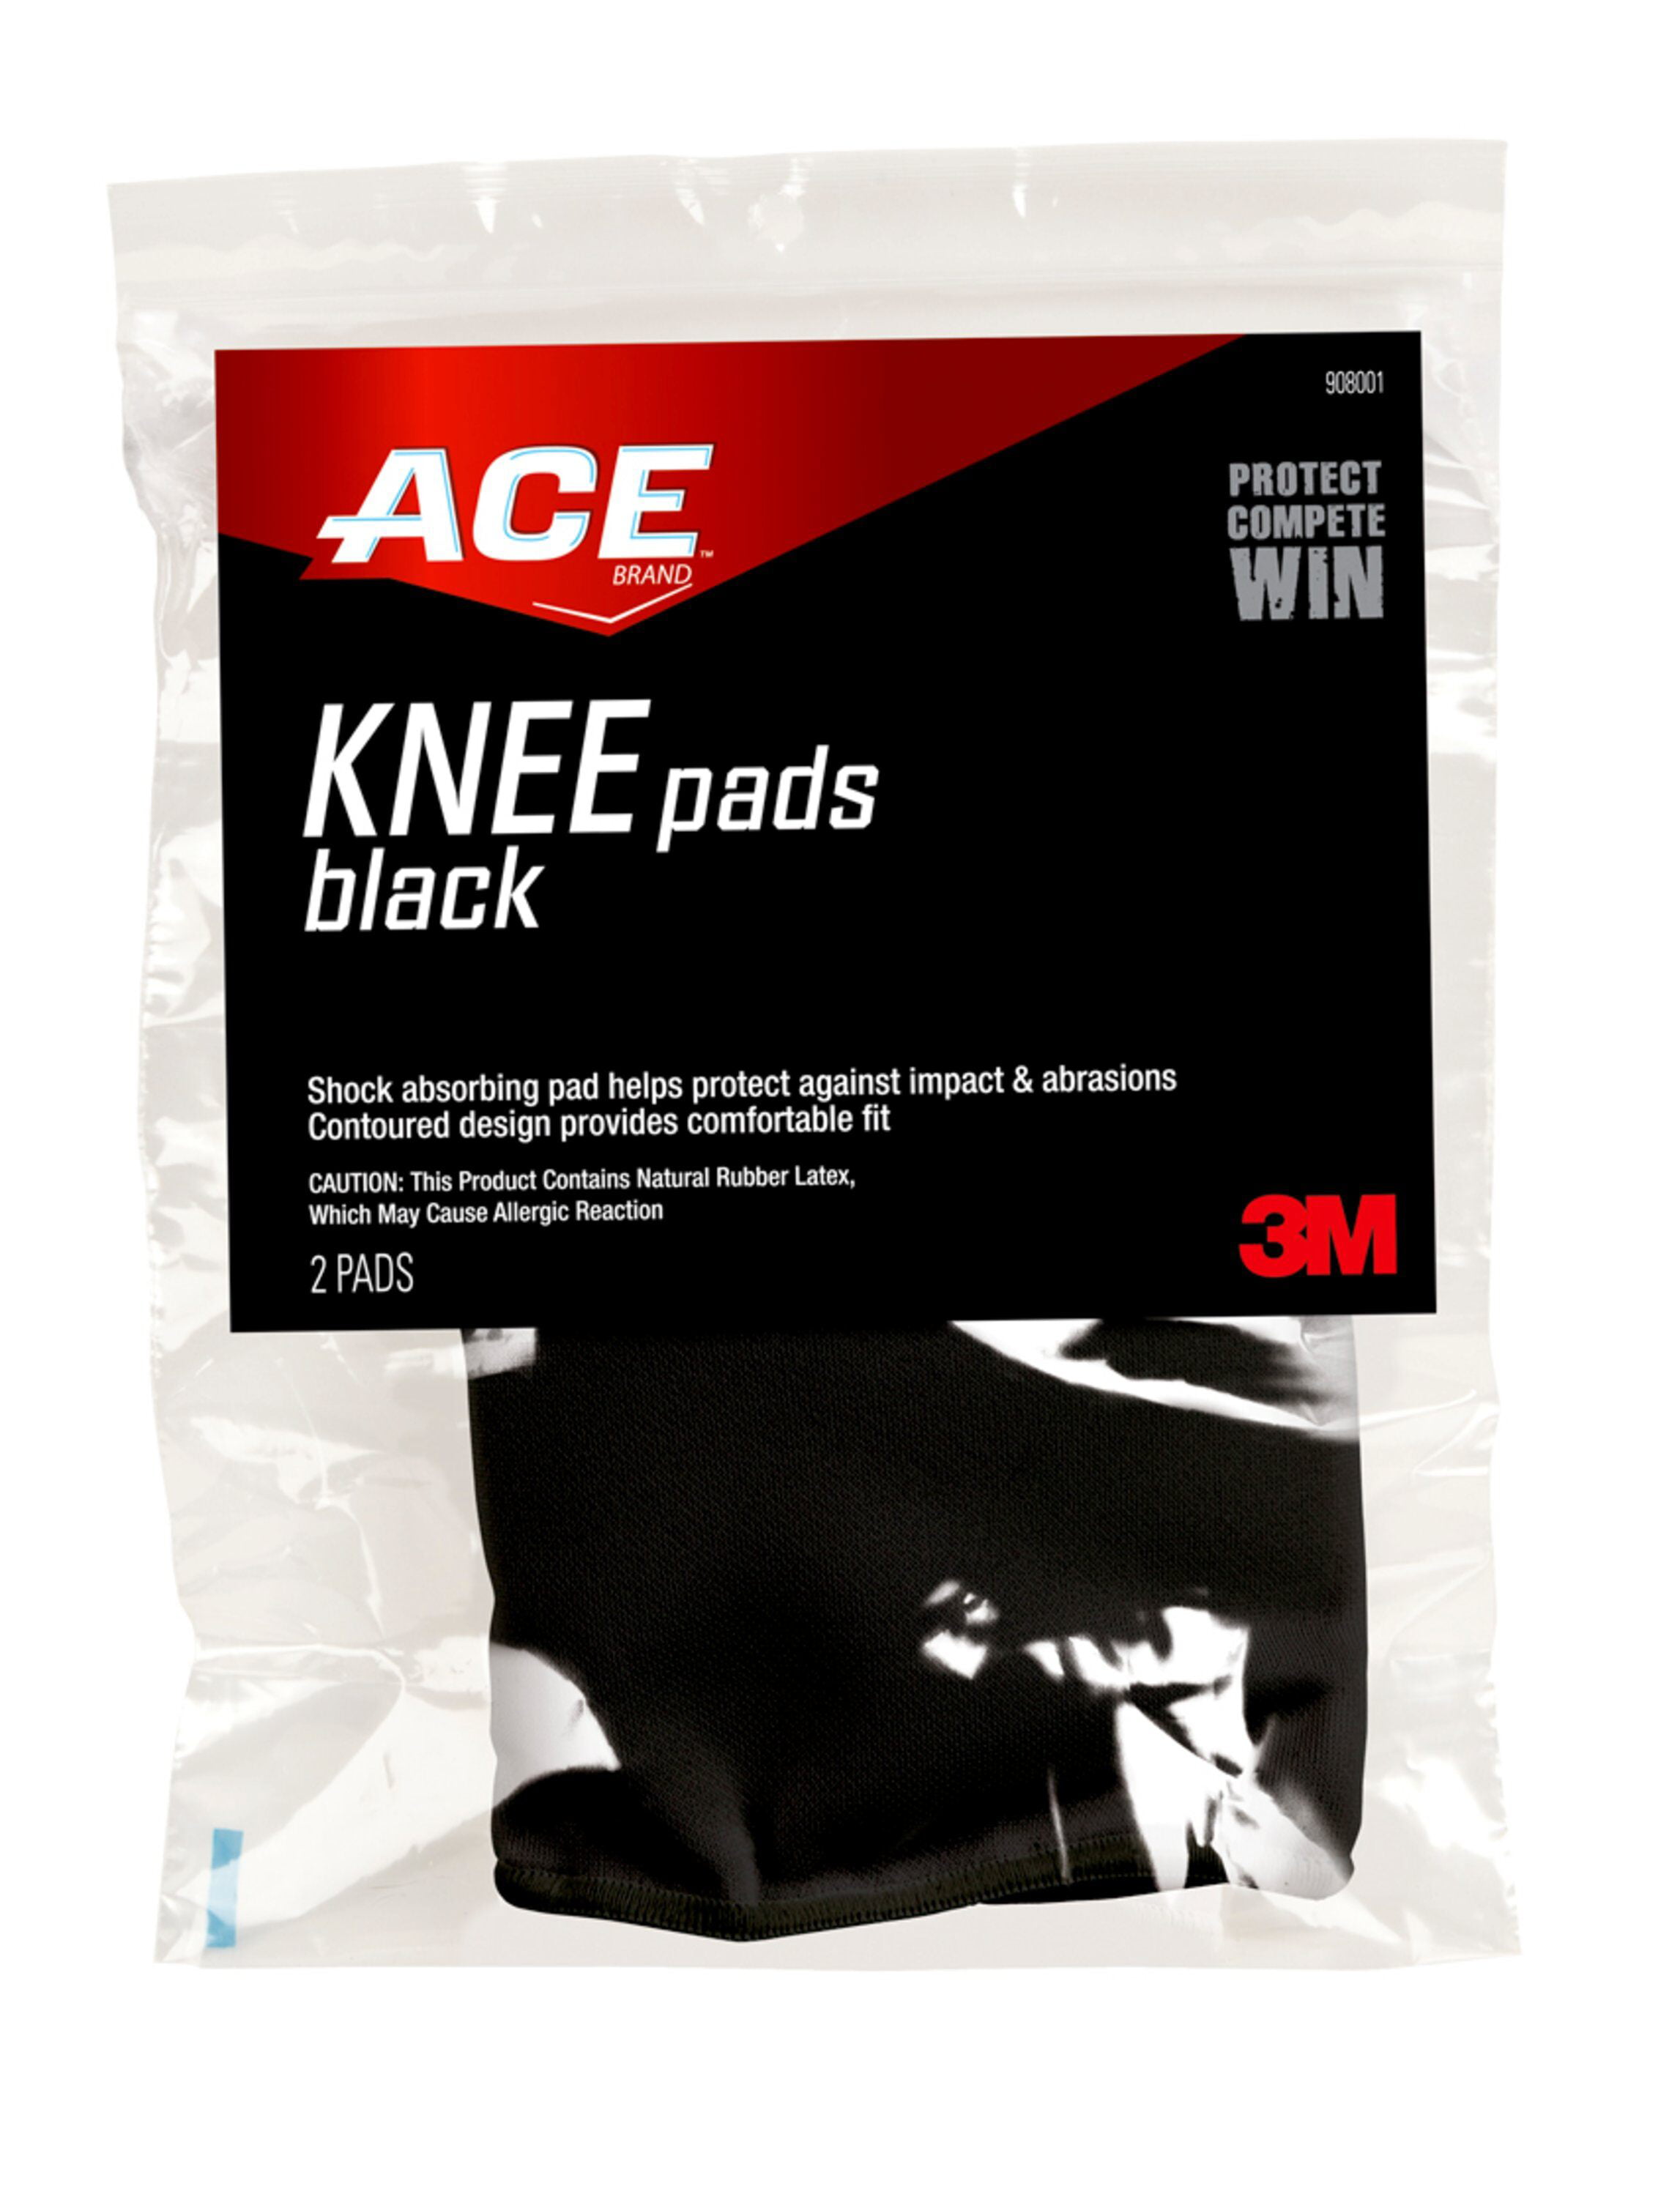 ace volleyball knee pads